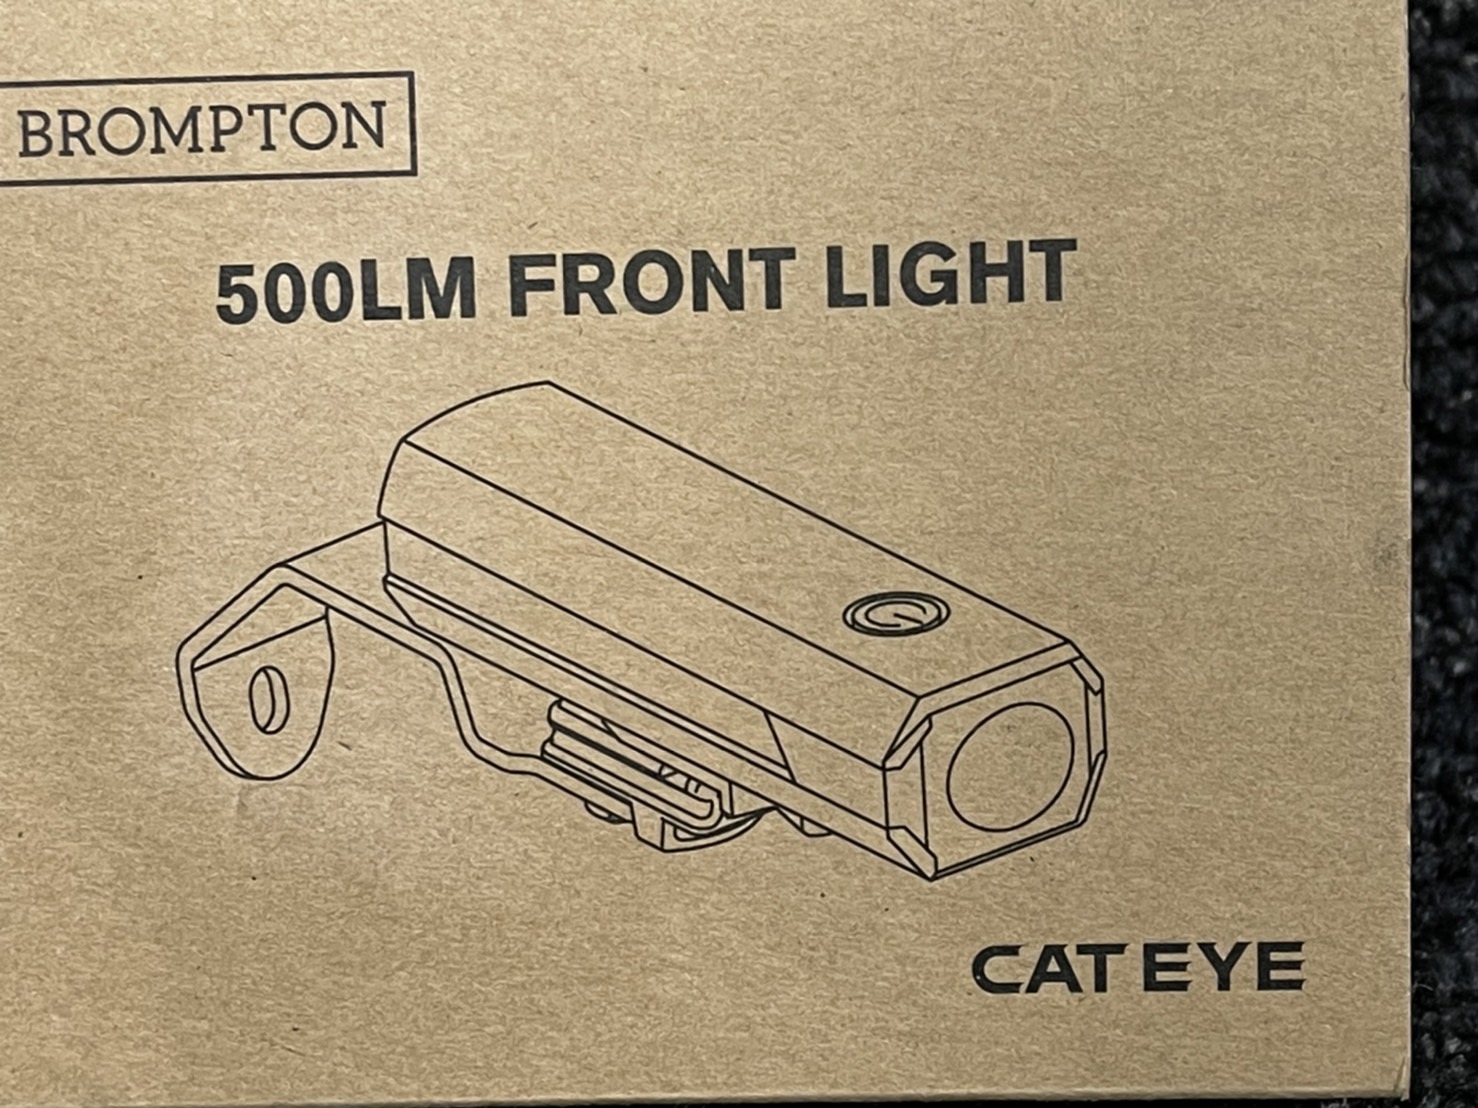 Brompton 500Lm Front Light